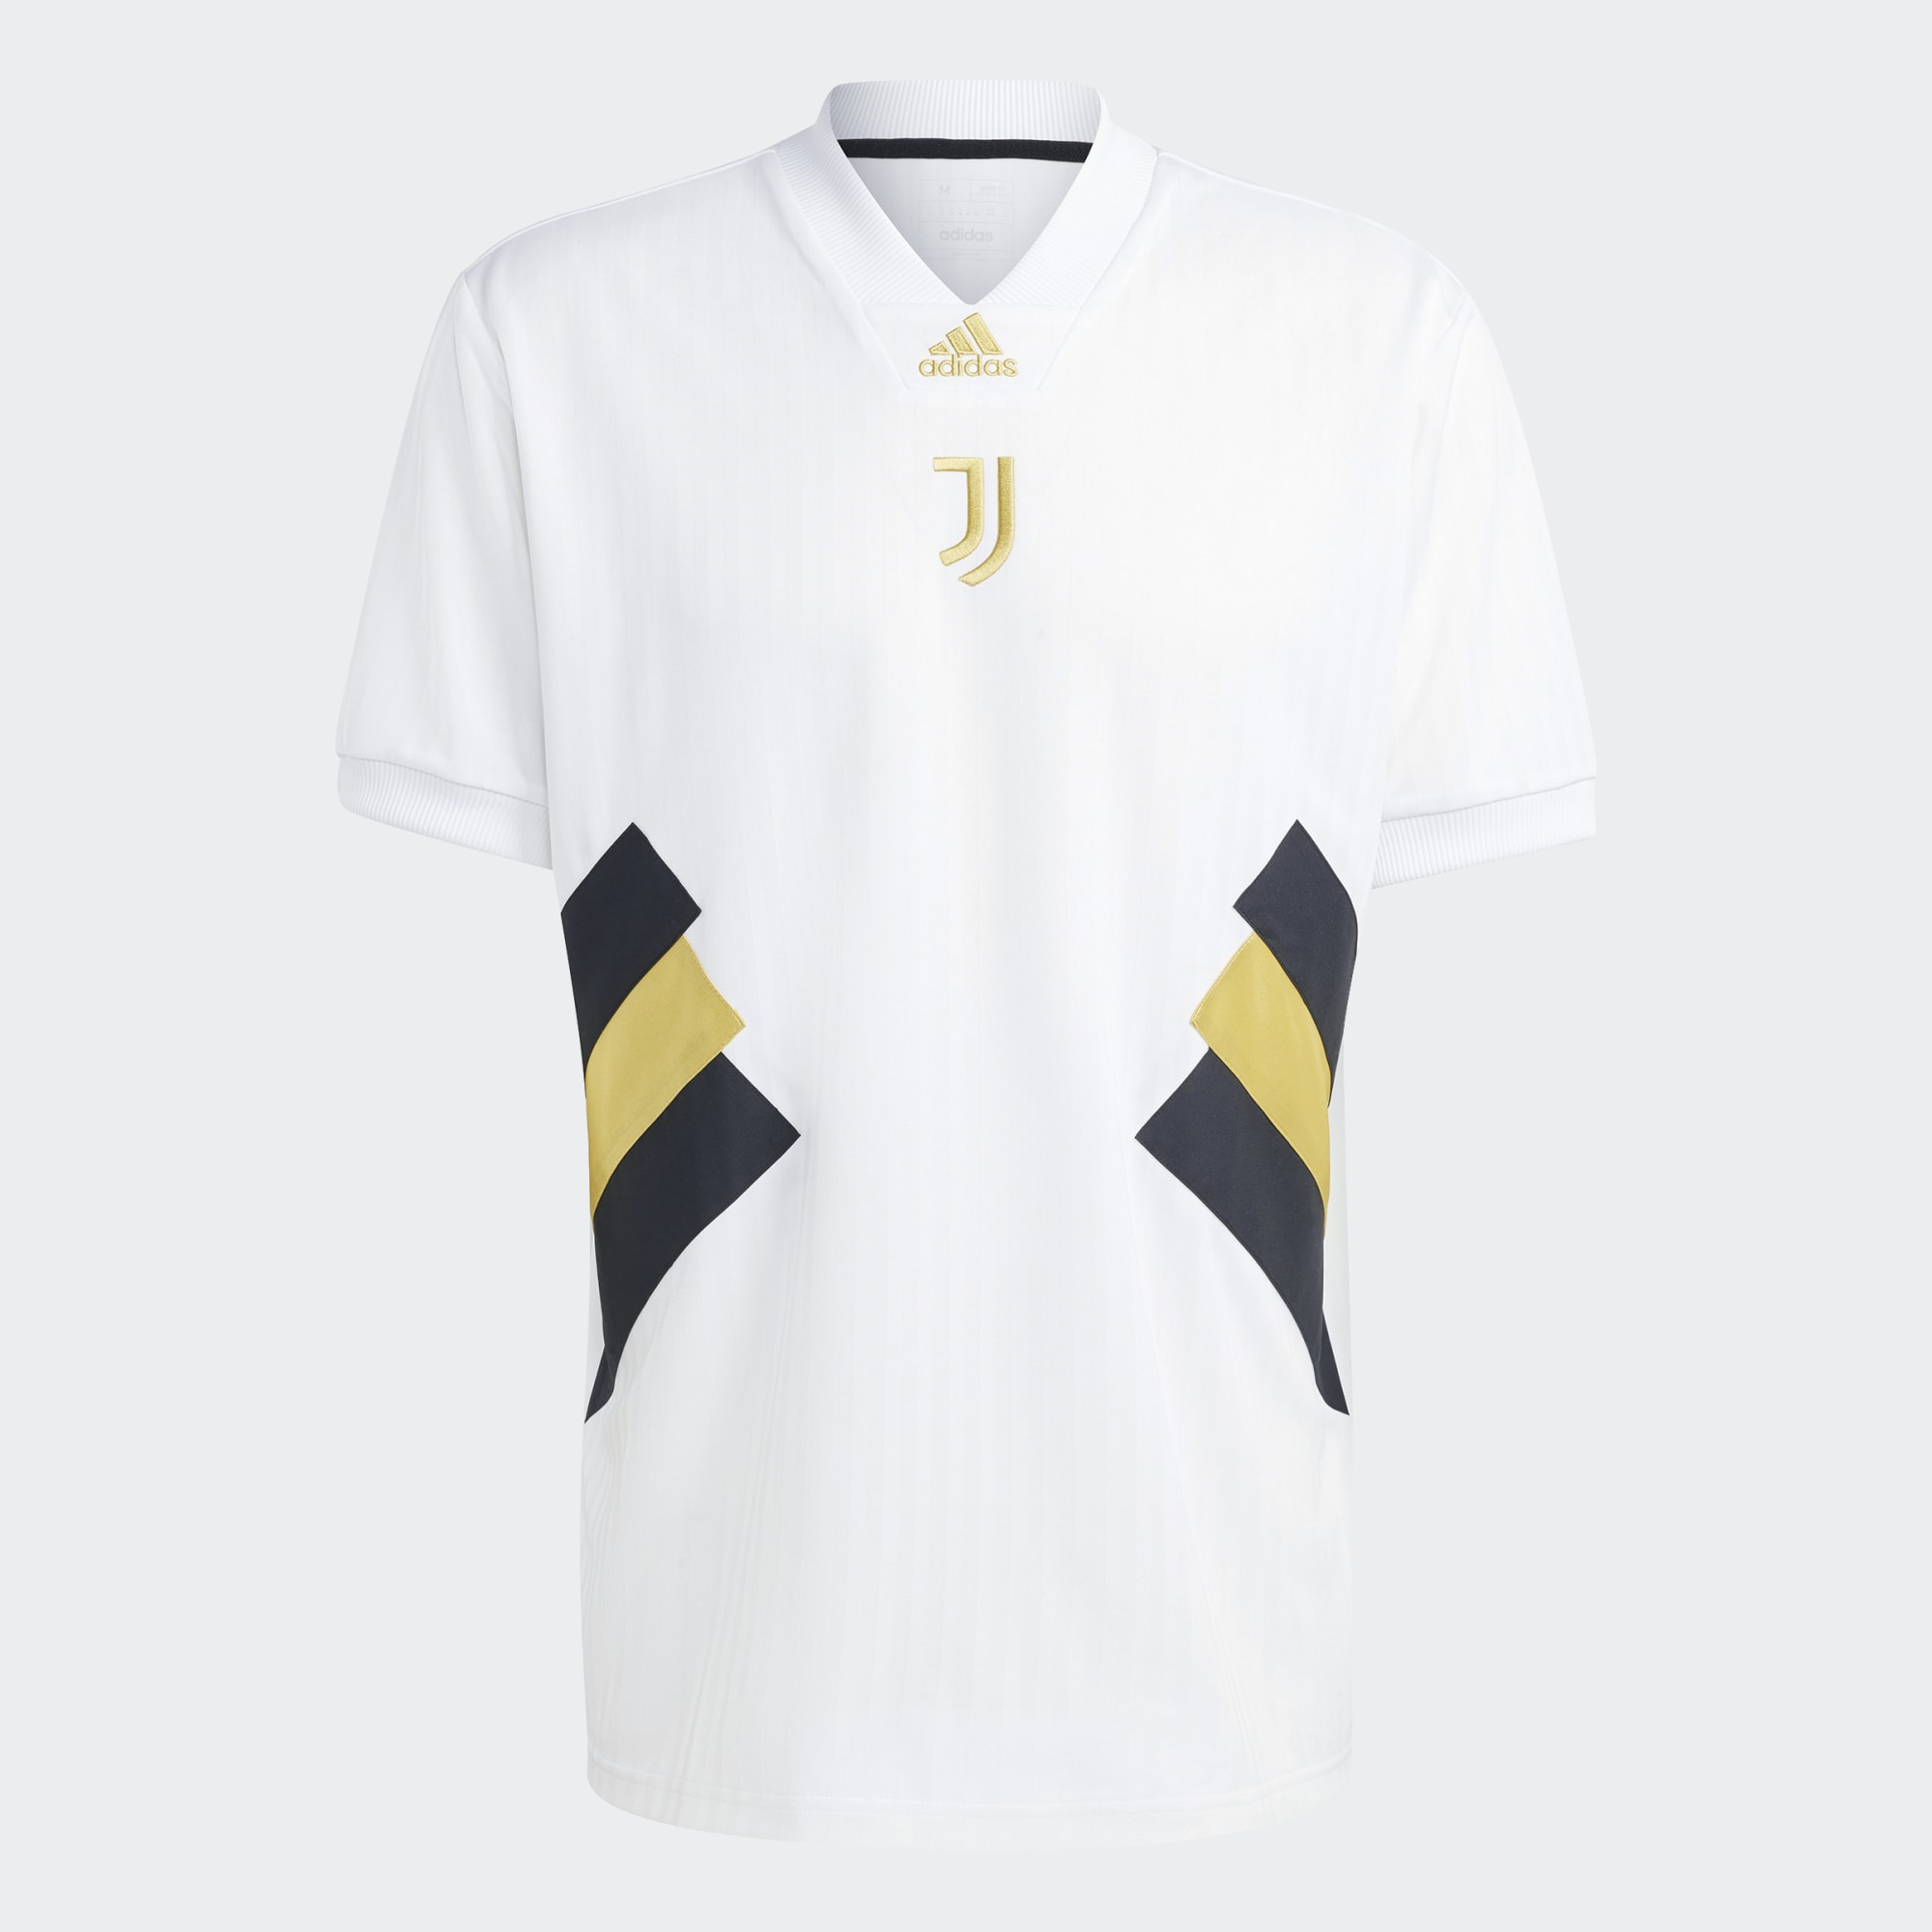 white and gold jersey